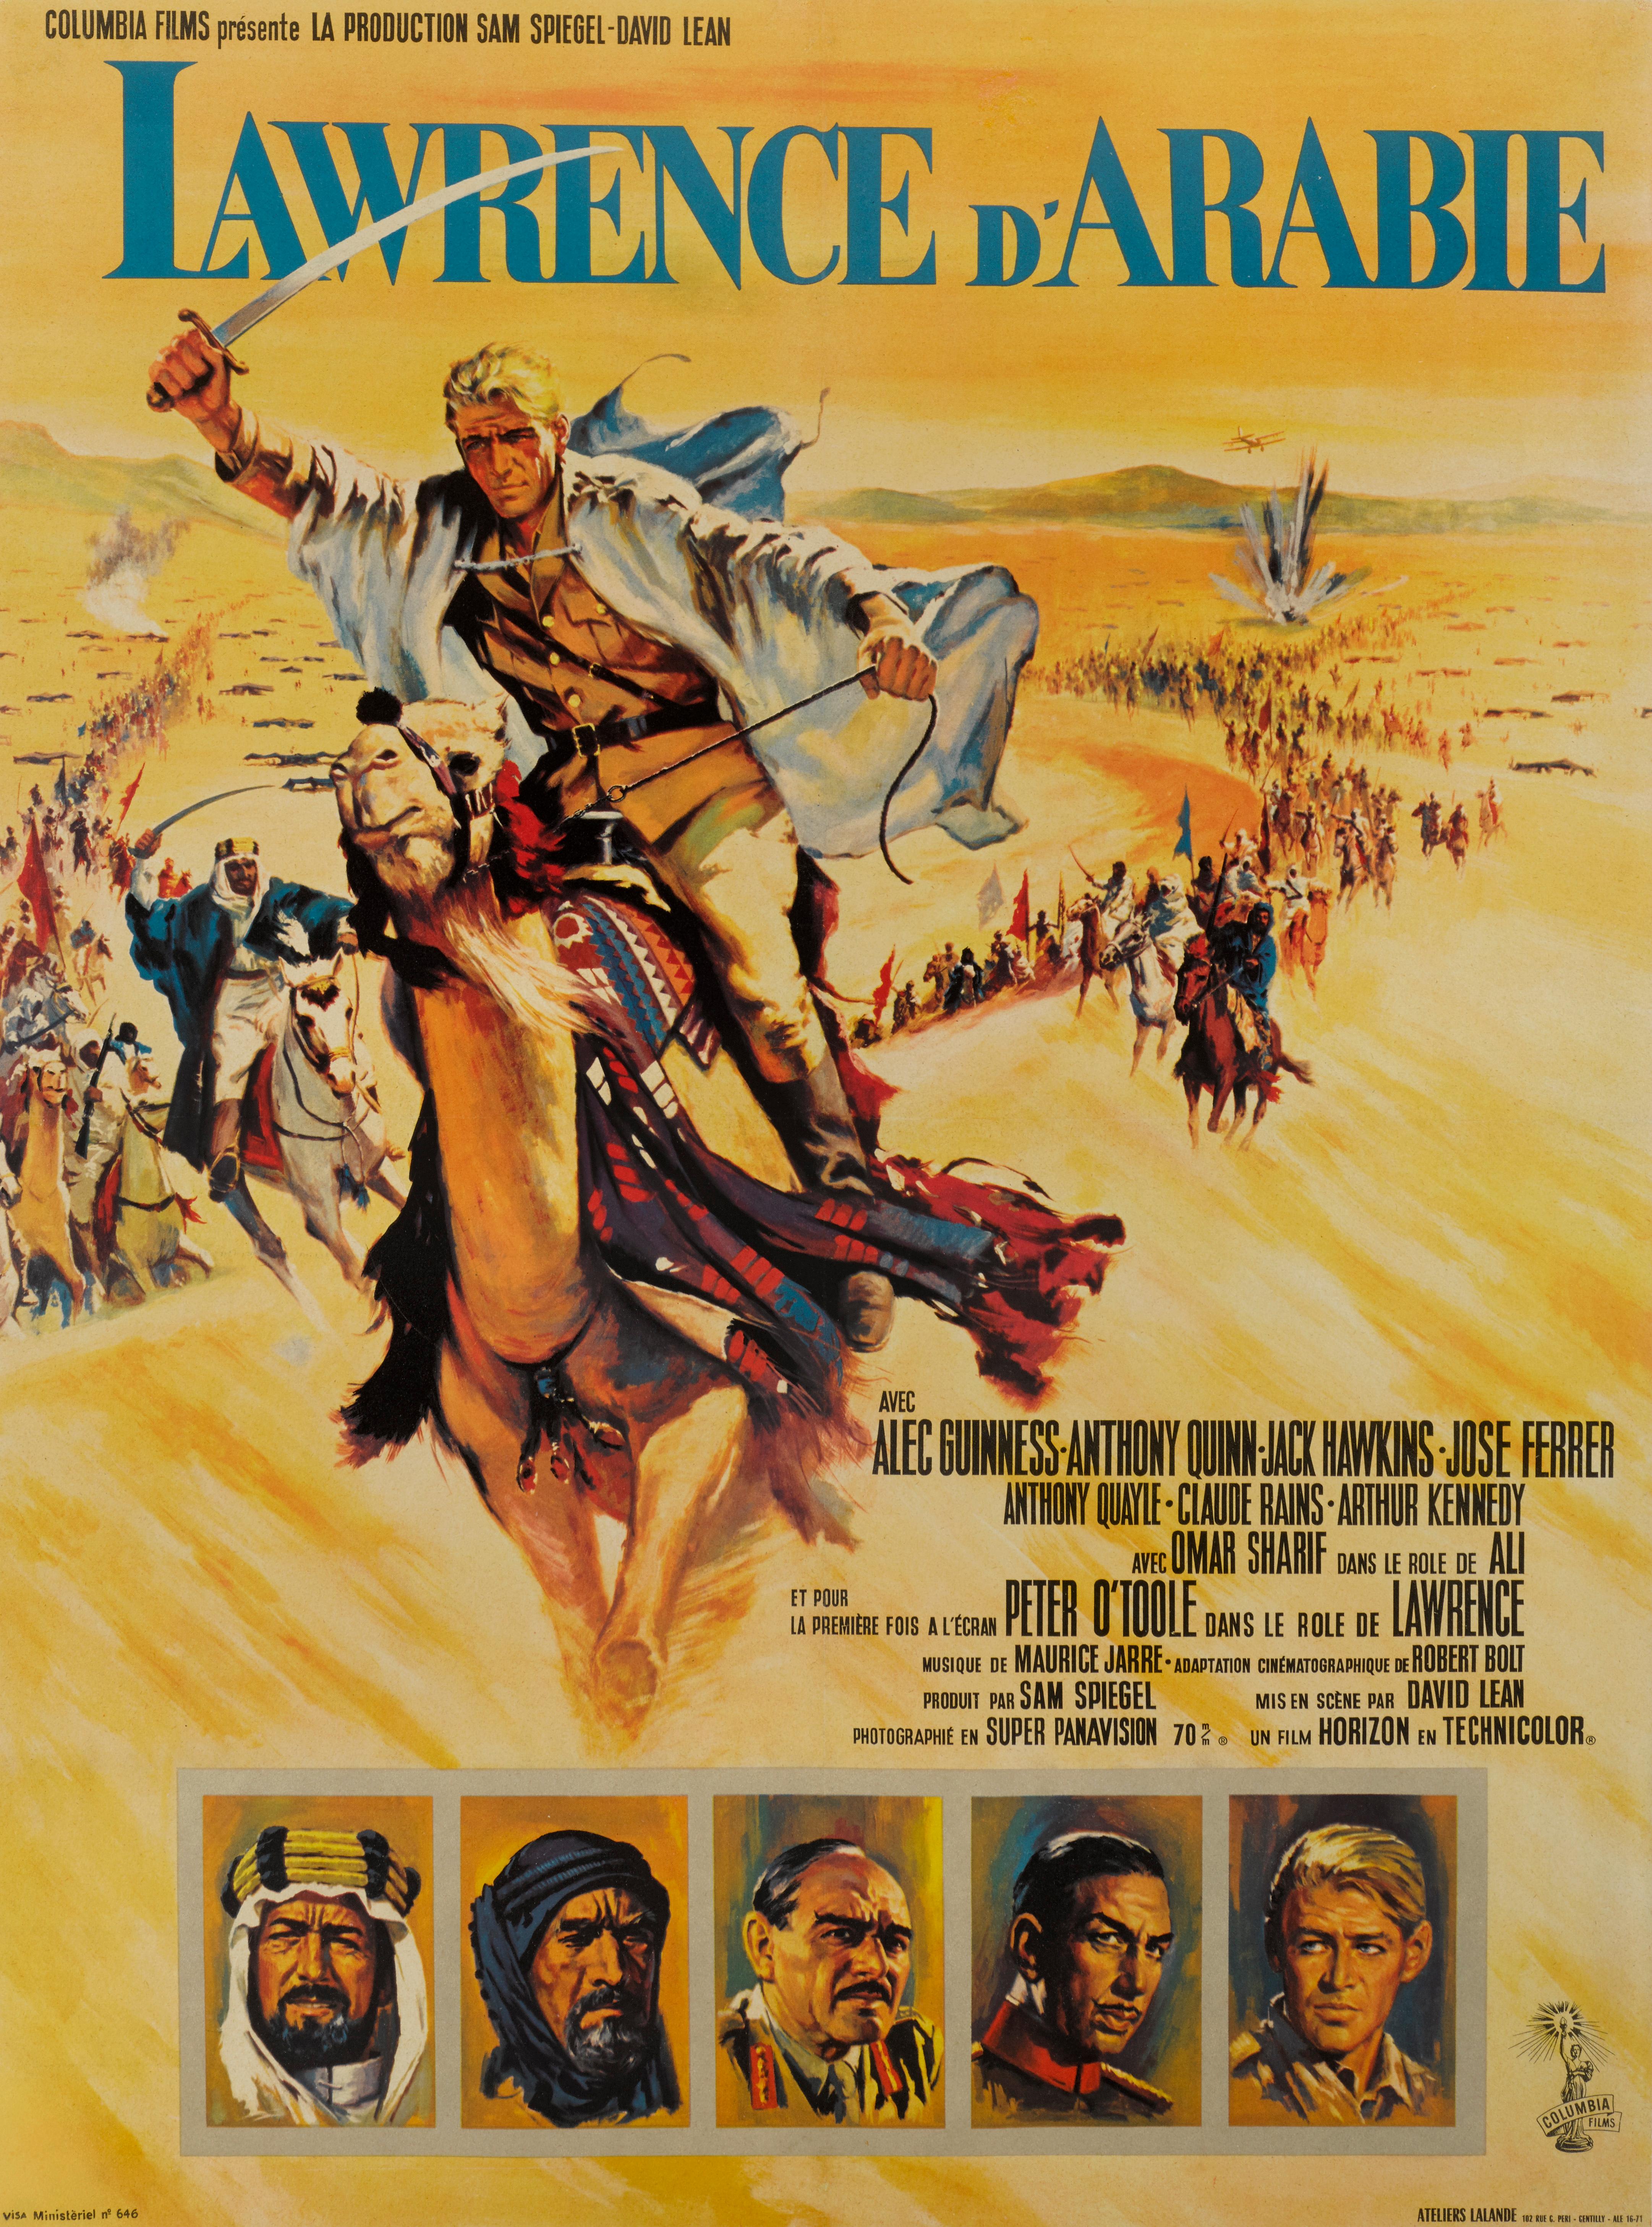 Original French film poster.
This epic British film is based on the life of T. E. Lawrence. It was directed by David Lean and produced by Sam Spiegel. The film stars Peter O'Toole in the title role, together with Alec Guinness, Anthony Quinn and